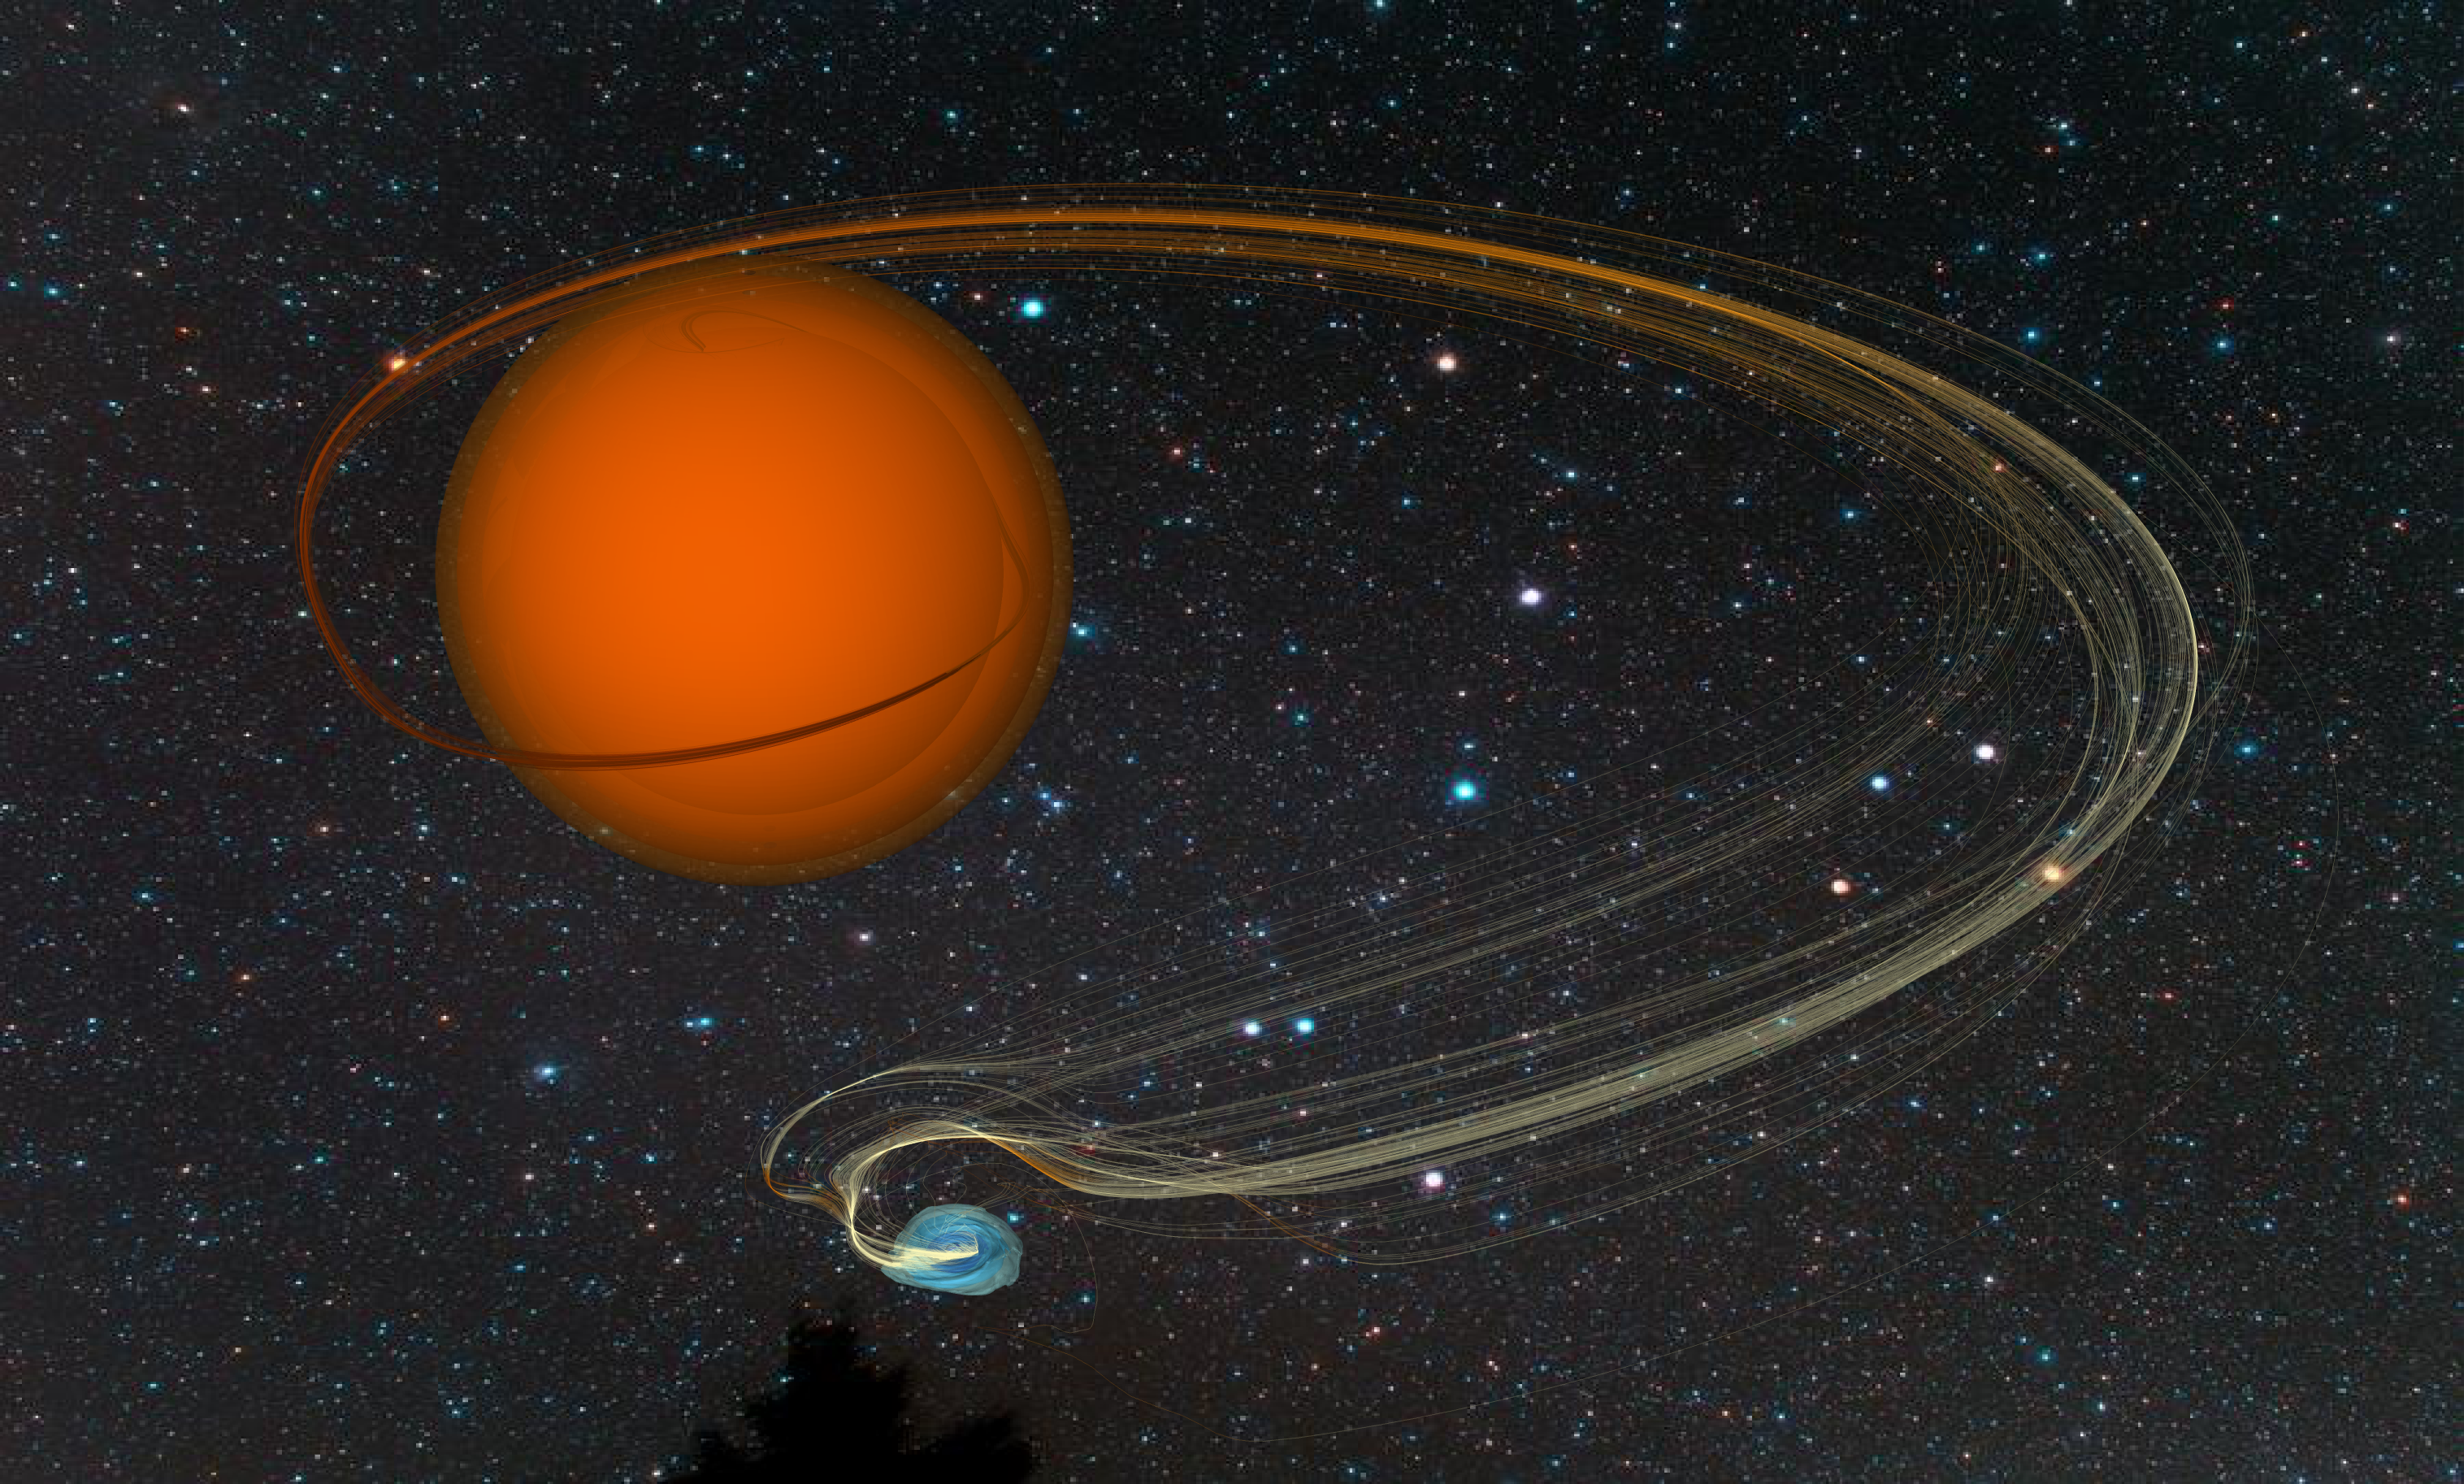 
An artistic impression based on a computer simulation of the <a href="https://www.sdss4.org/press-releases/a-giant-meal-for-a-dwarf/">Draco C1 symbiotic binary star system</a> showing material flowing off the red giant star onto the white dwarf. These systems are the progenitors of some types of supernovae.
Image credit: John Blondin, North Carolina State University; See <a href="https://ui.adsabs.harvard.edu/abs/2020ApJ...900L..43L/abstract">Lewis et al. 2020</a>
